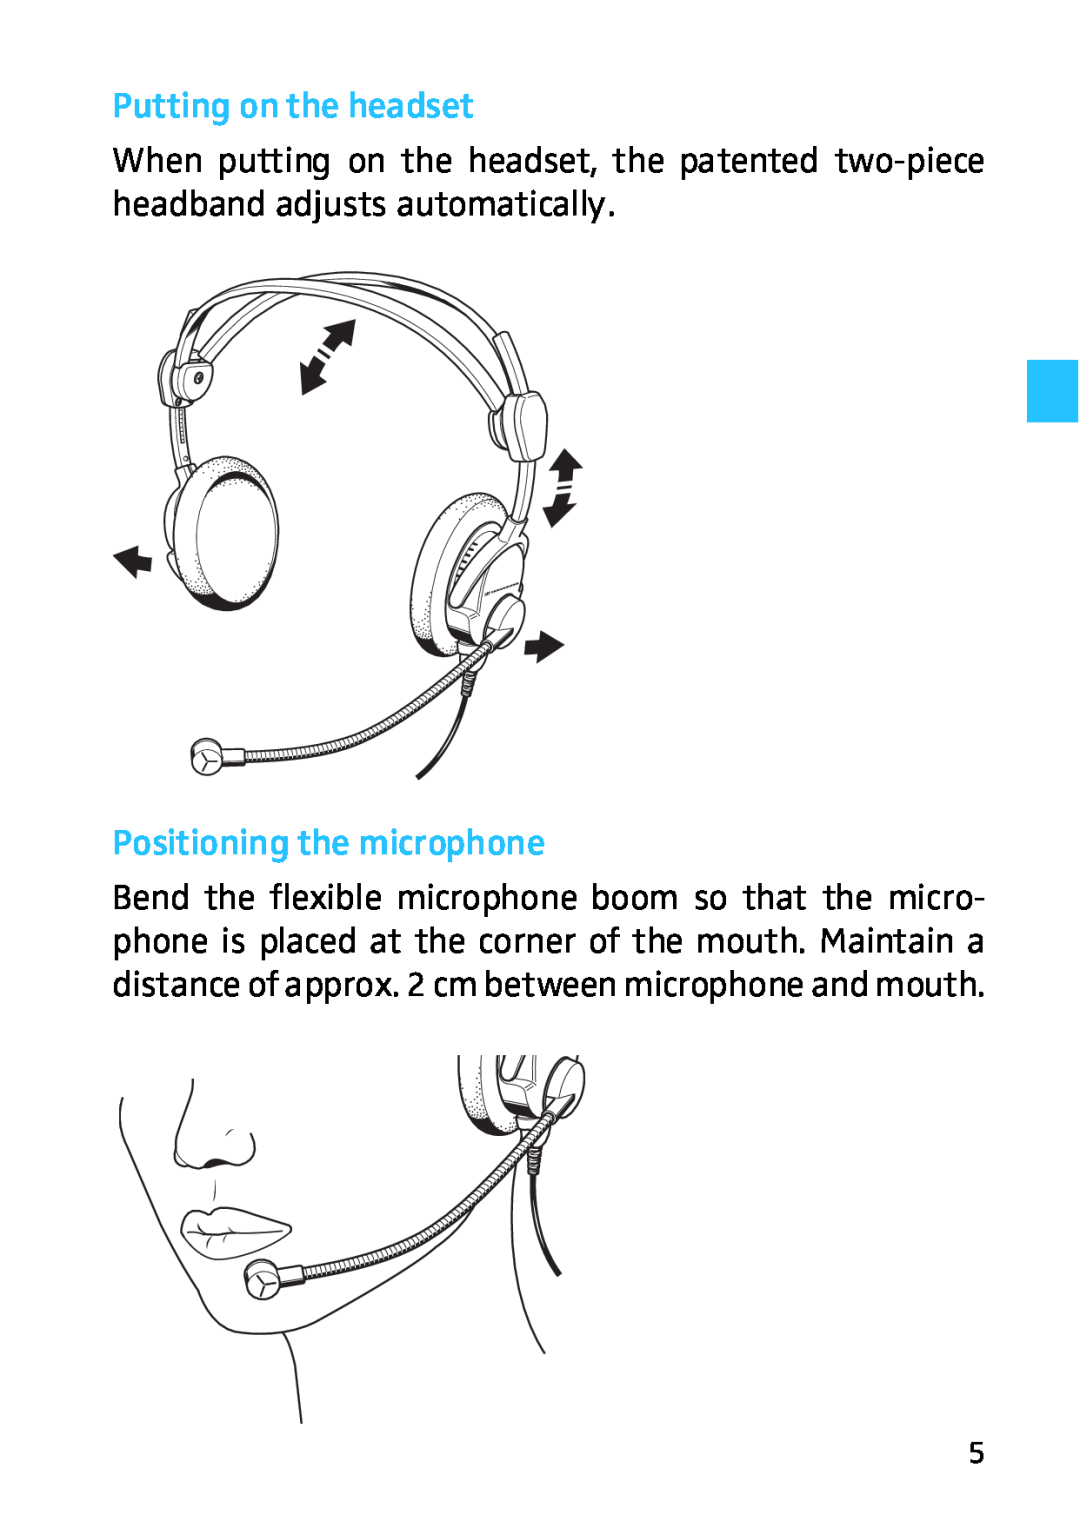 Sennheiser HMD 46, HME 46 manual Putting on the headset, Positioning the microphone 